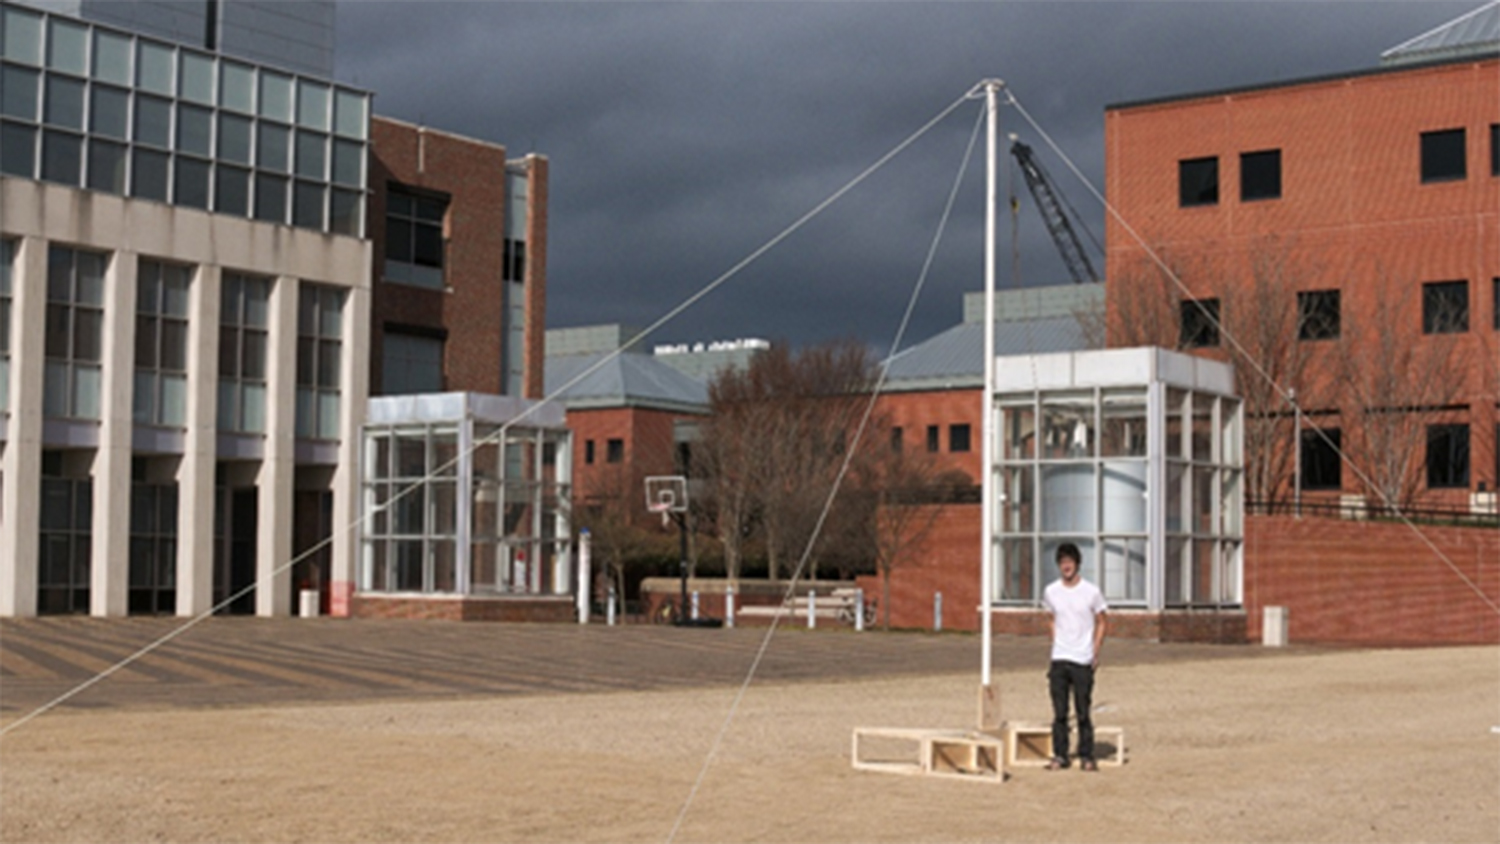 Student with a full-size antenna.